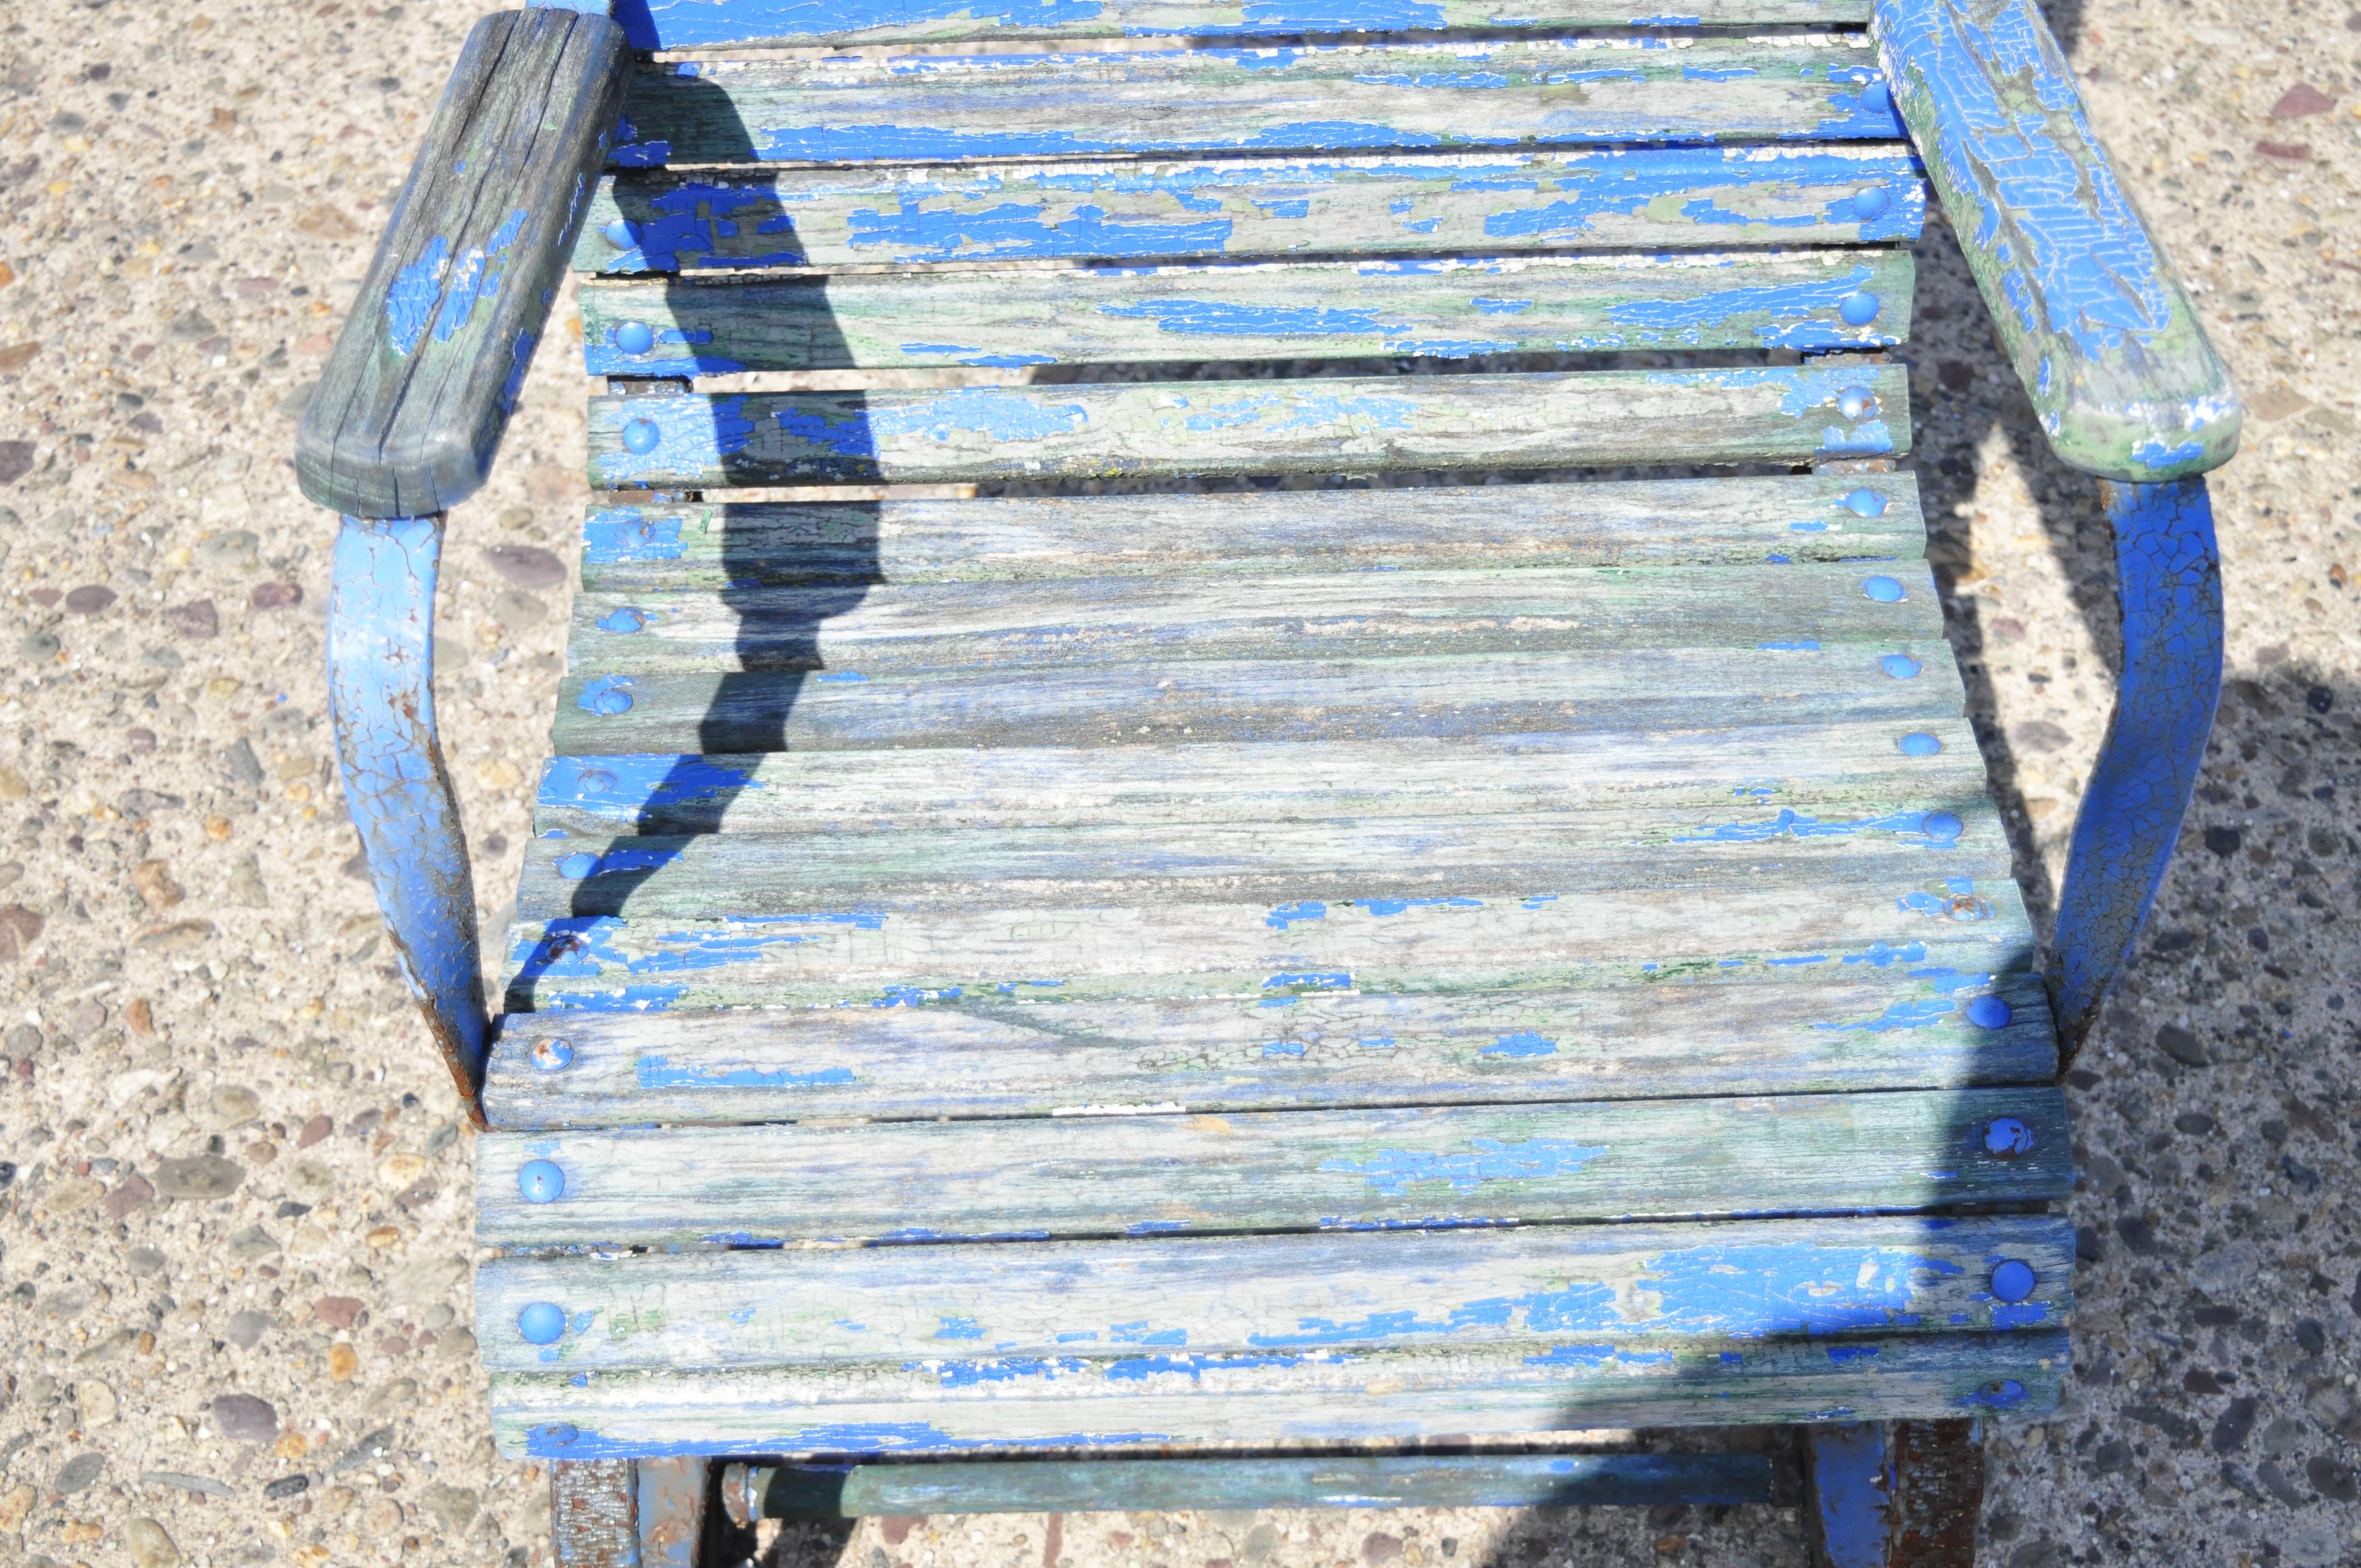 North American Antique Distressed Blue Paint Wood Slat Wrought Iron Patio Garden Bouncer Chair